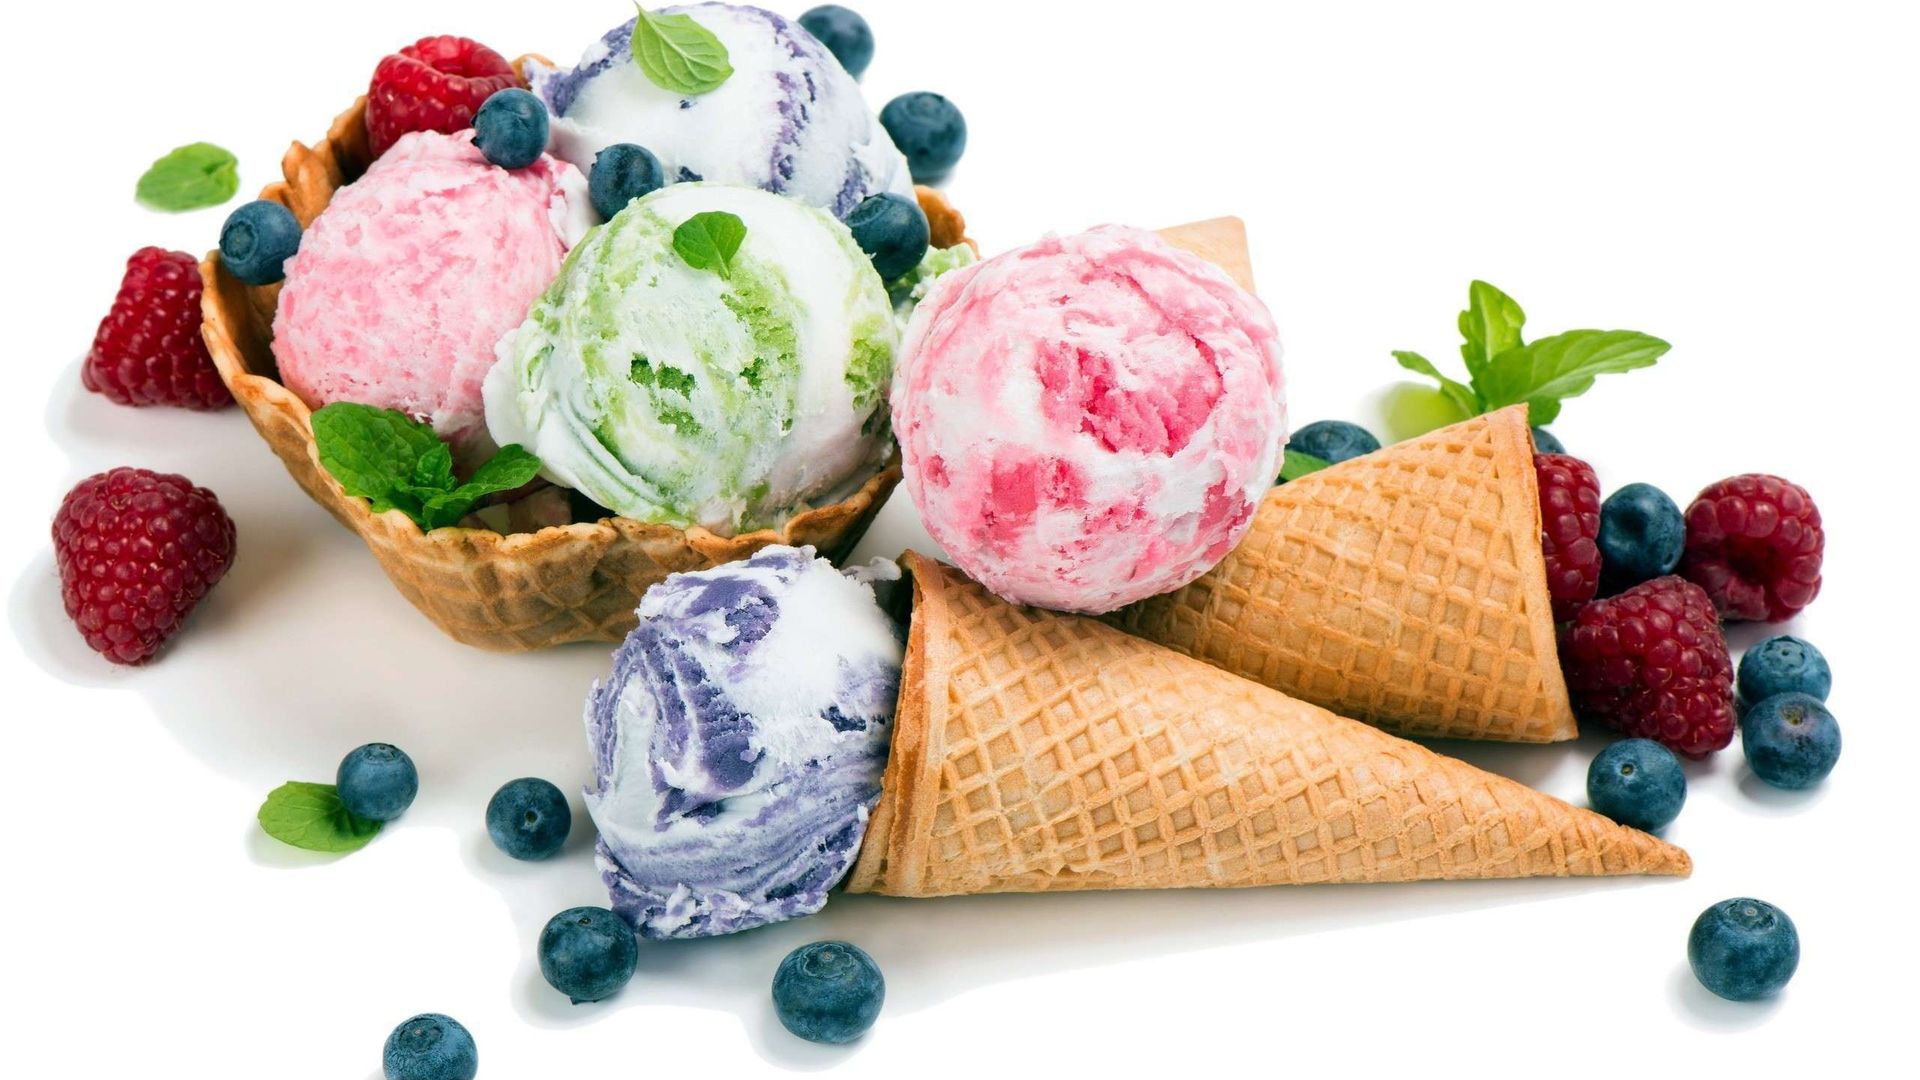 Ice Cream And Berries With White Background Wallpaper